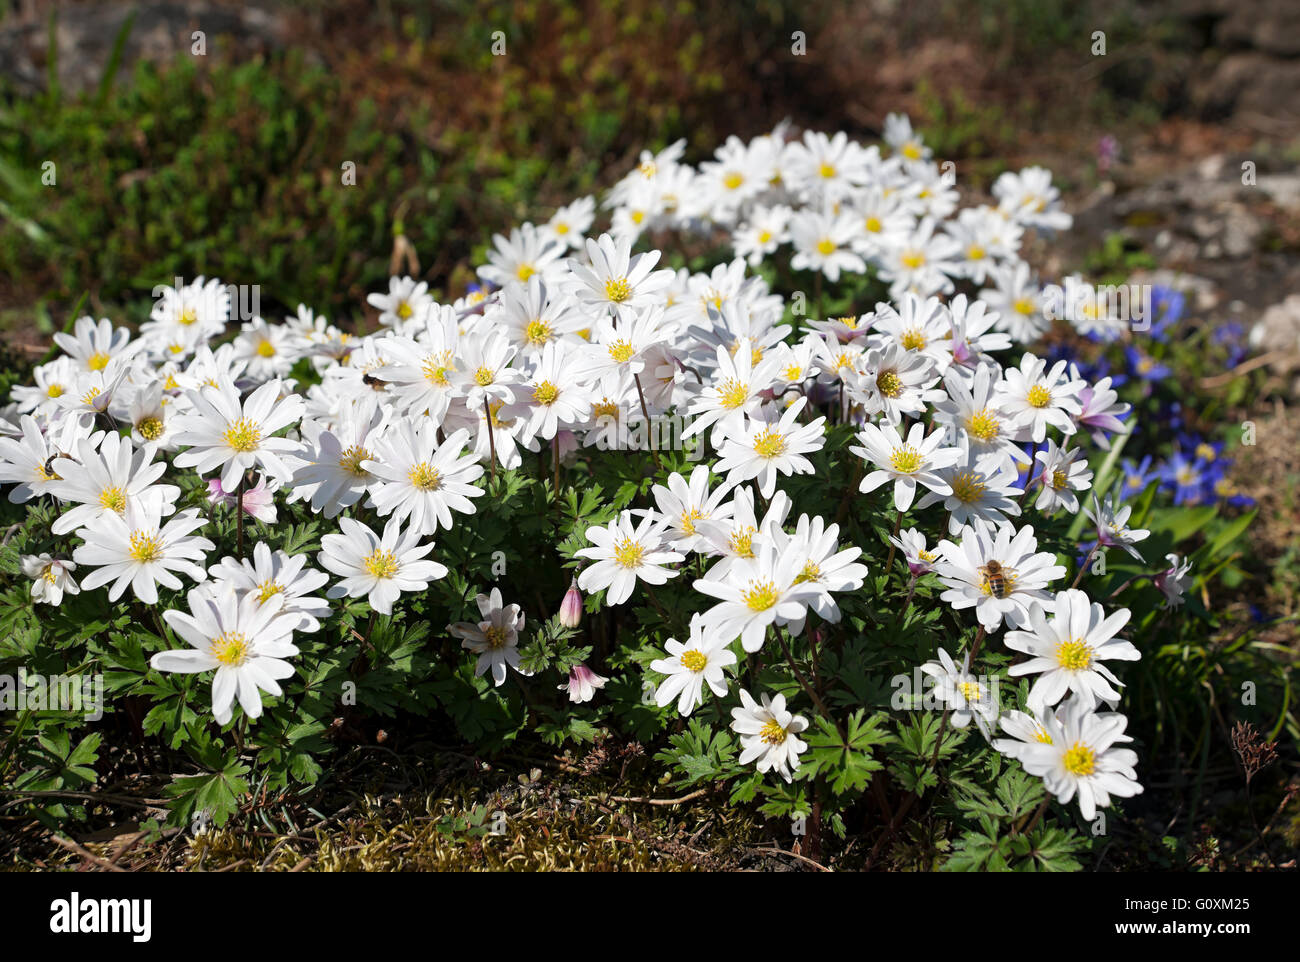 Close up of white anemones flowers anemone flower flowering in spring England UK United Kingdom GB Great Britain Stock Photo